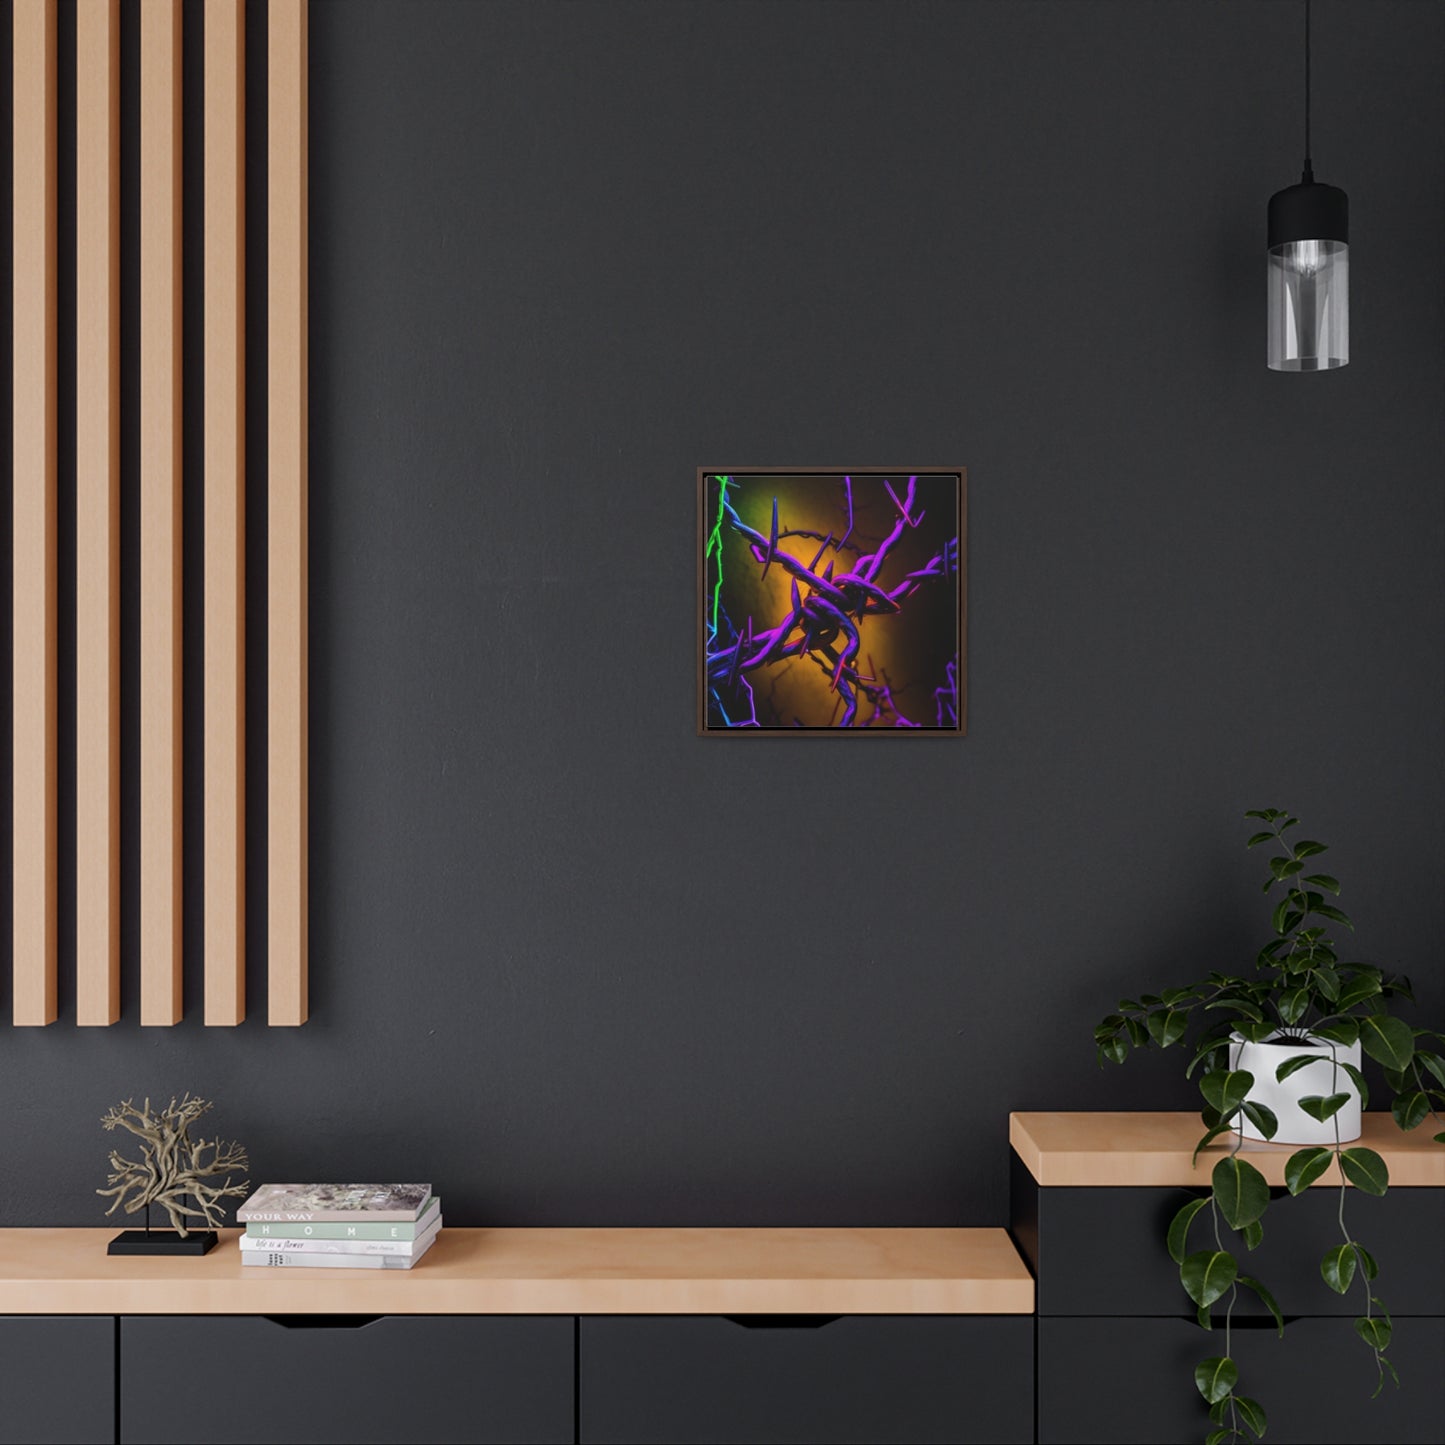 Gallery Canvas Wraps, Square Frame Macro Neon Barb 1